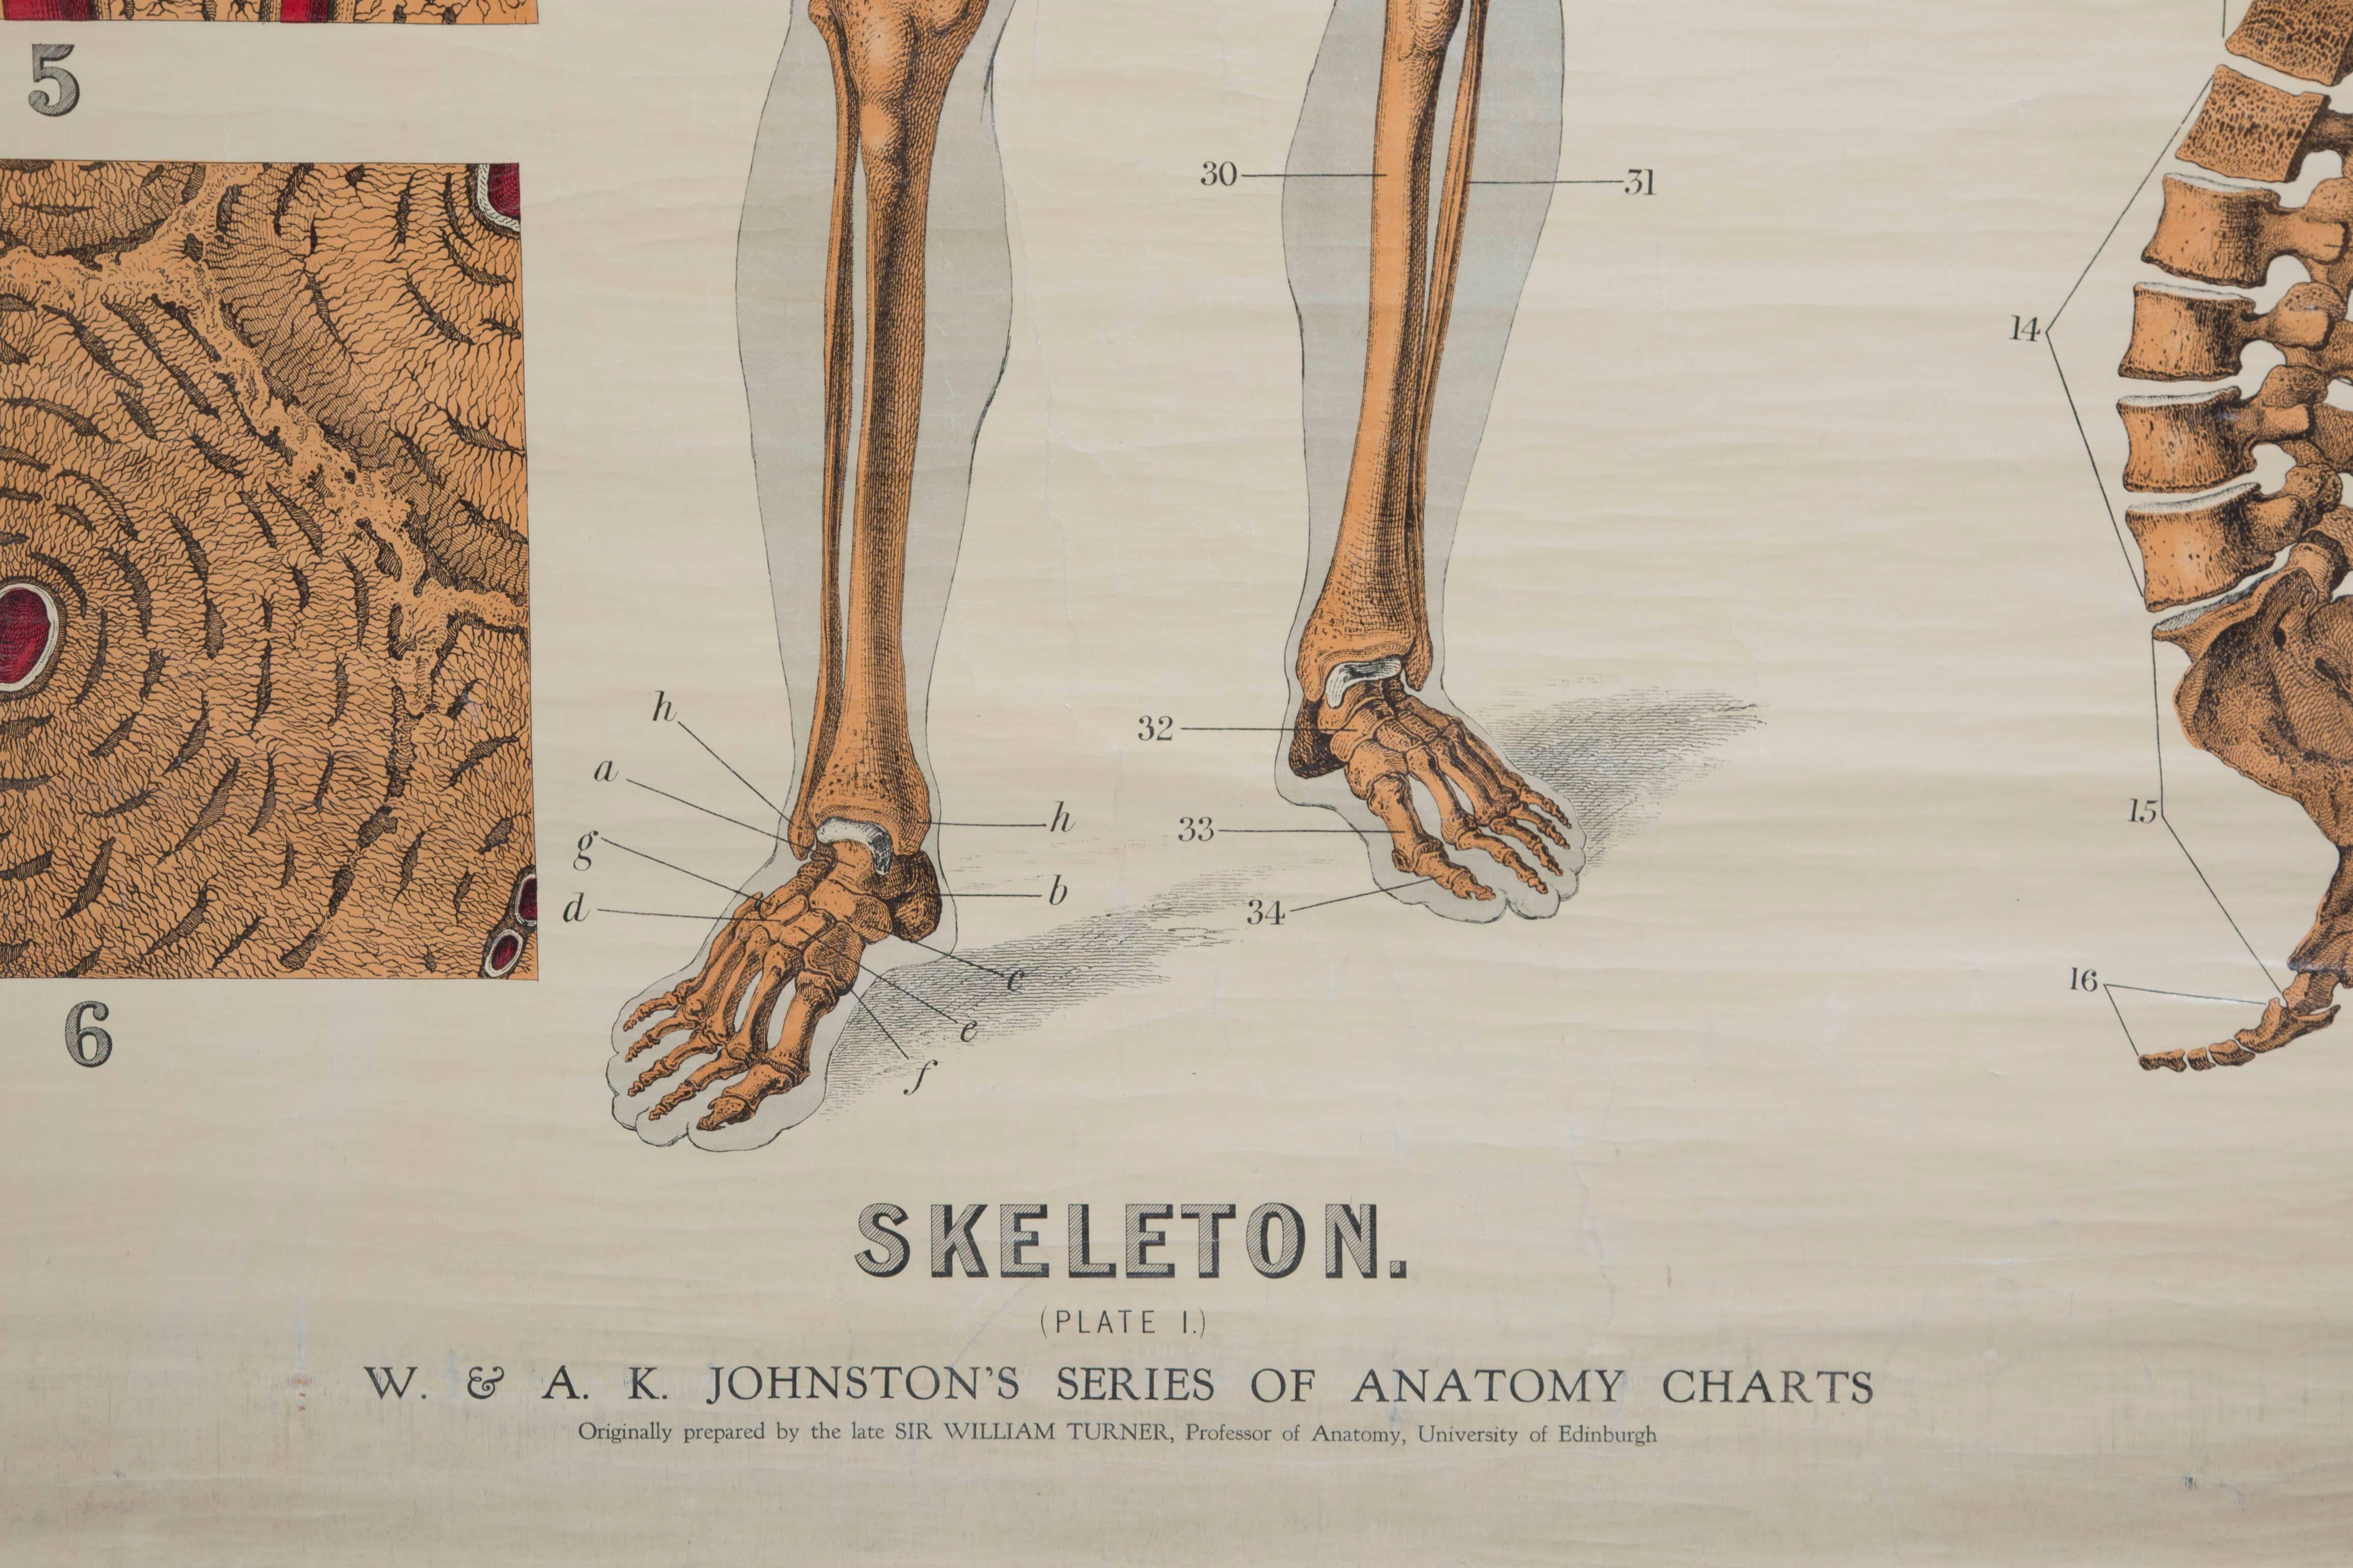 W&A J Johnstone early 20th century anatomical studies of Homo Sapiens, lithographically printed in polychromatic colors.